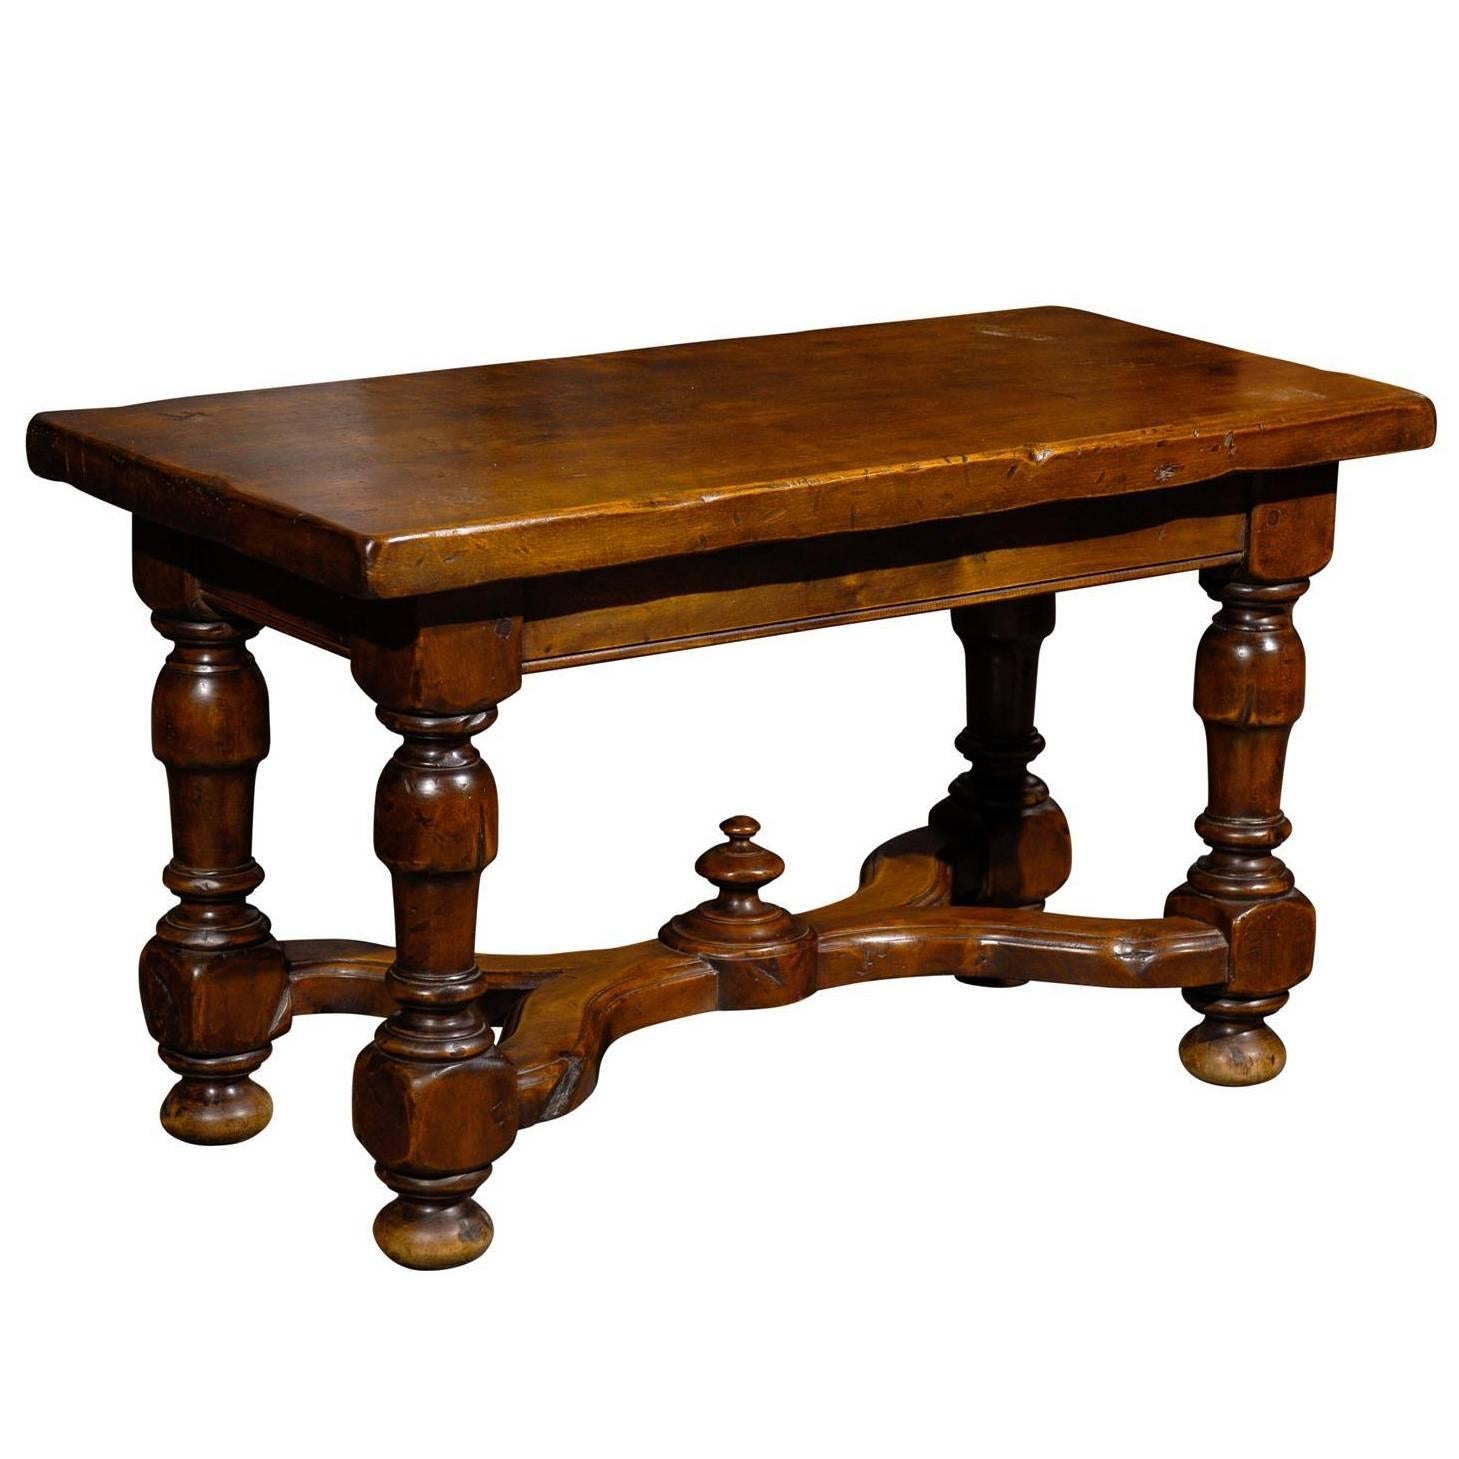 French Walnut Stool or Bench with Carved Stretcher from the Early 20th Century